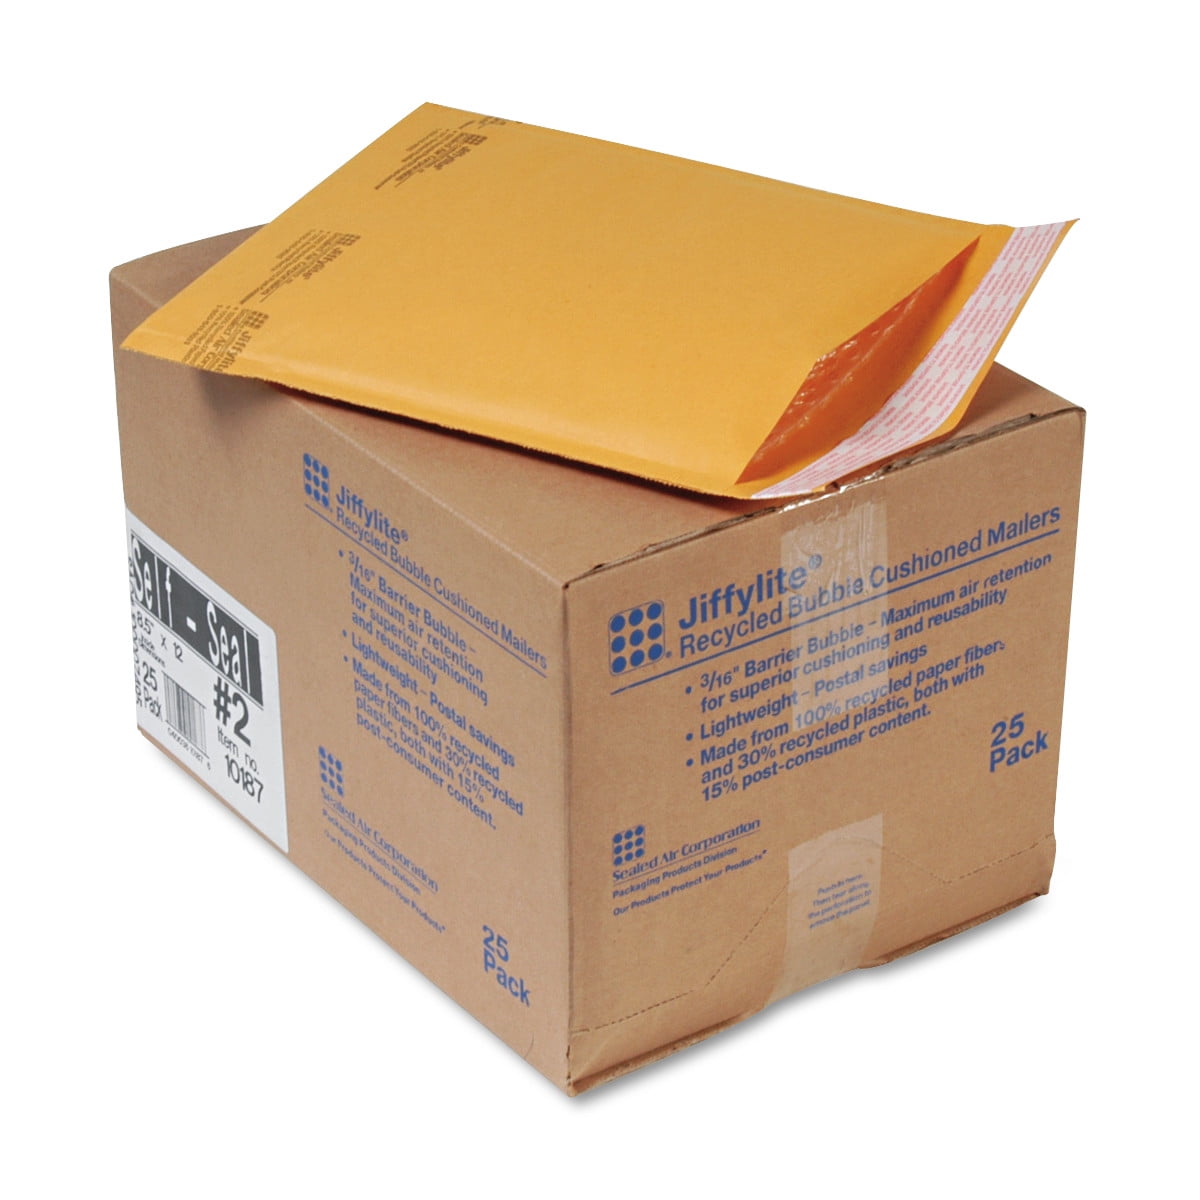 Sealed Air JiffyLite Cellular Cushioned Mailer, #2, 8.5